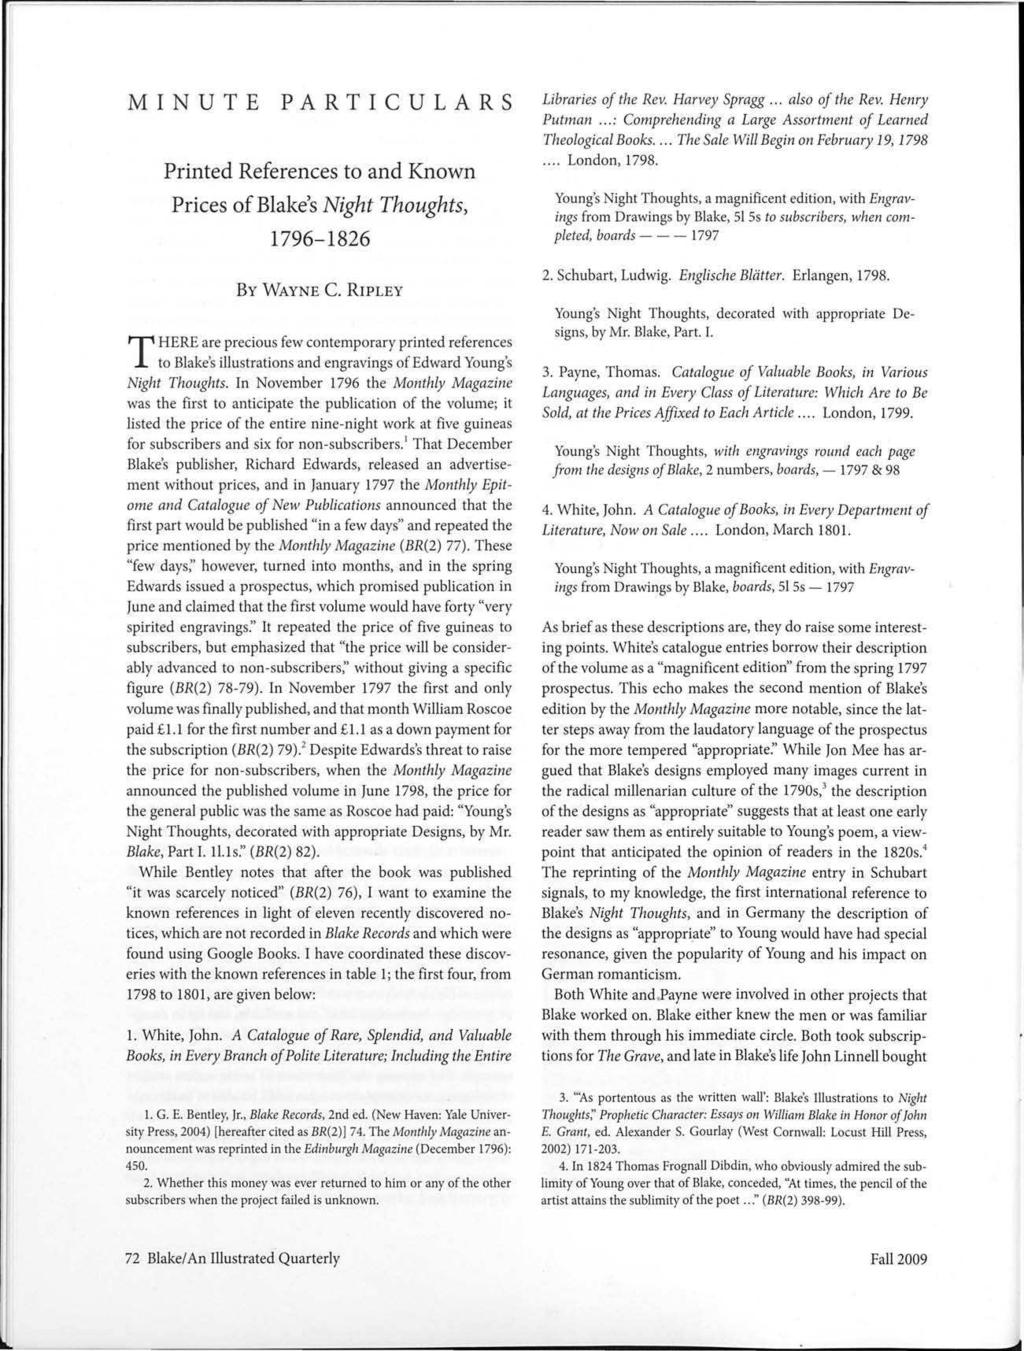 MINUTE PARTICULARS Printed References to and Known Prices of Blake's Night Thoughts, 1796-1826 BY WAYNE c.